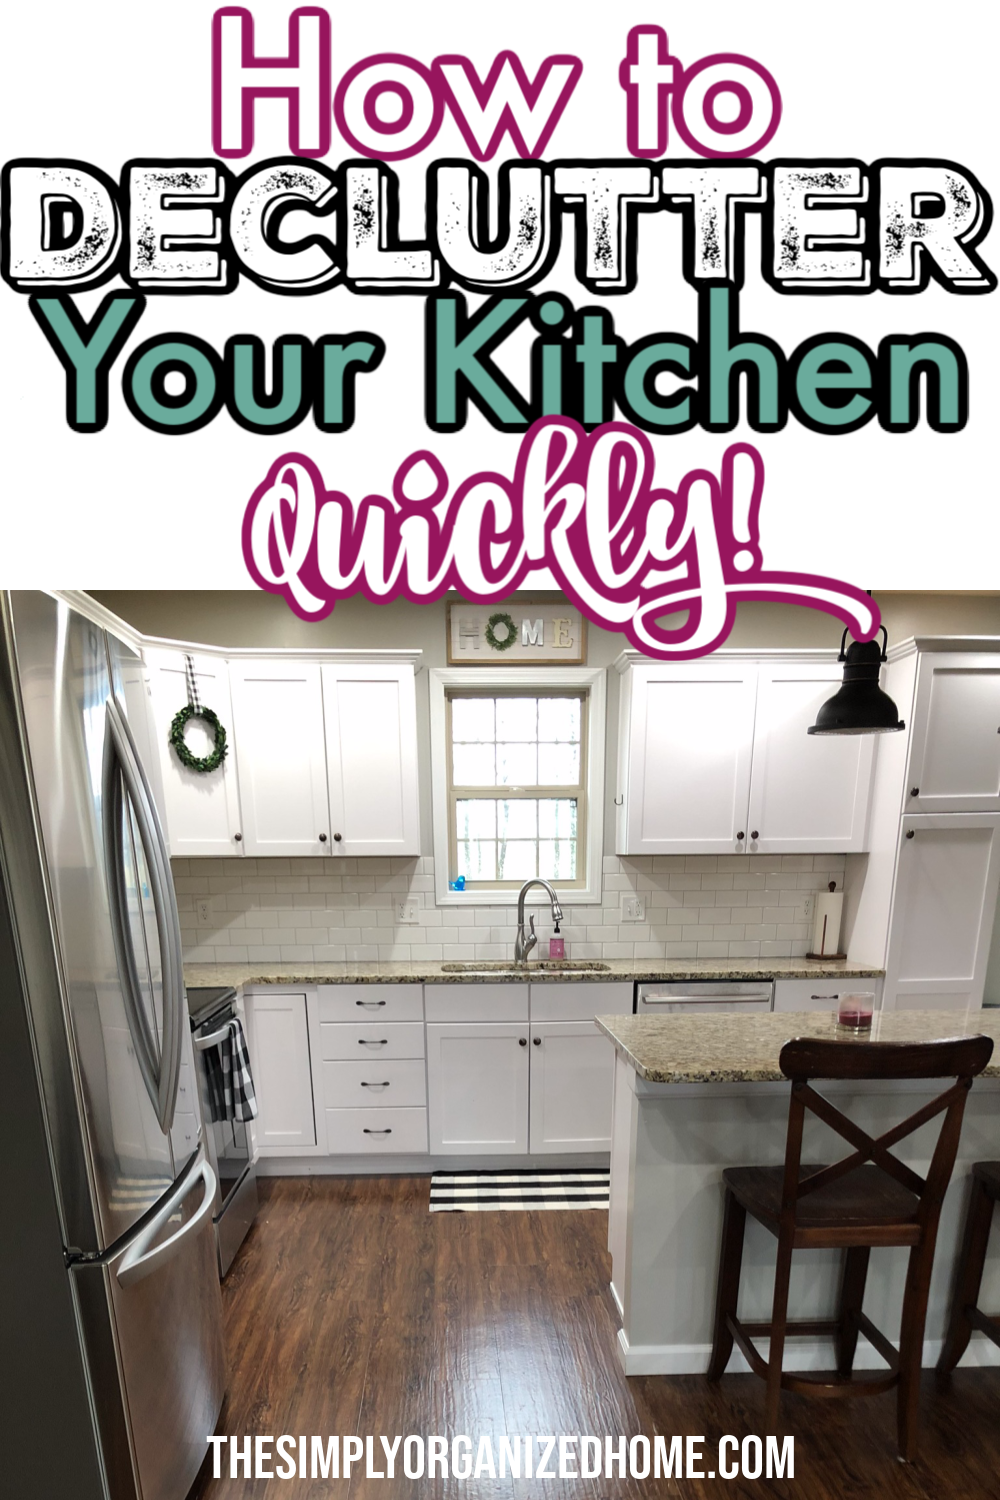 12 Ways to Declutter Your Kitchen Counters and Cupboards